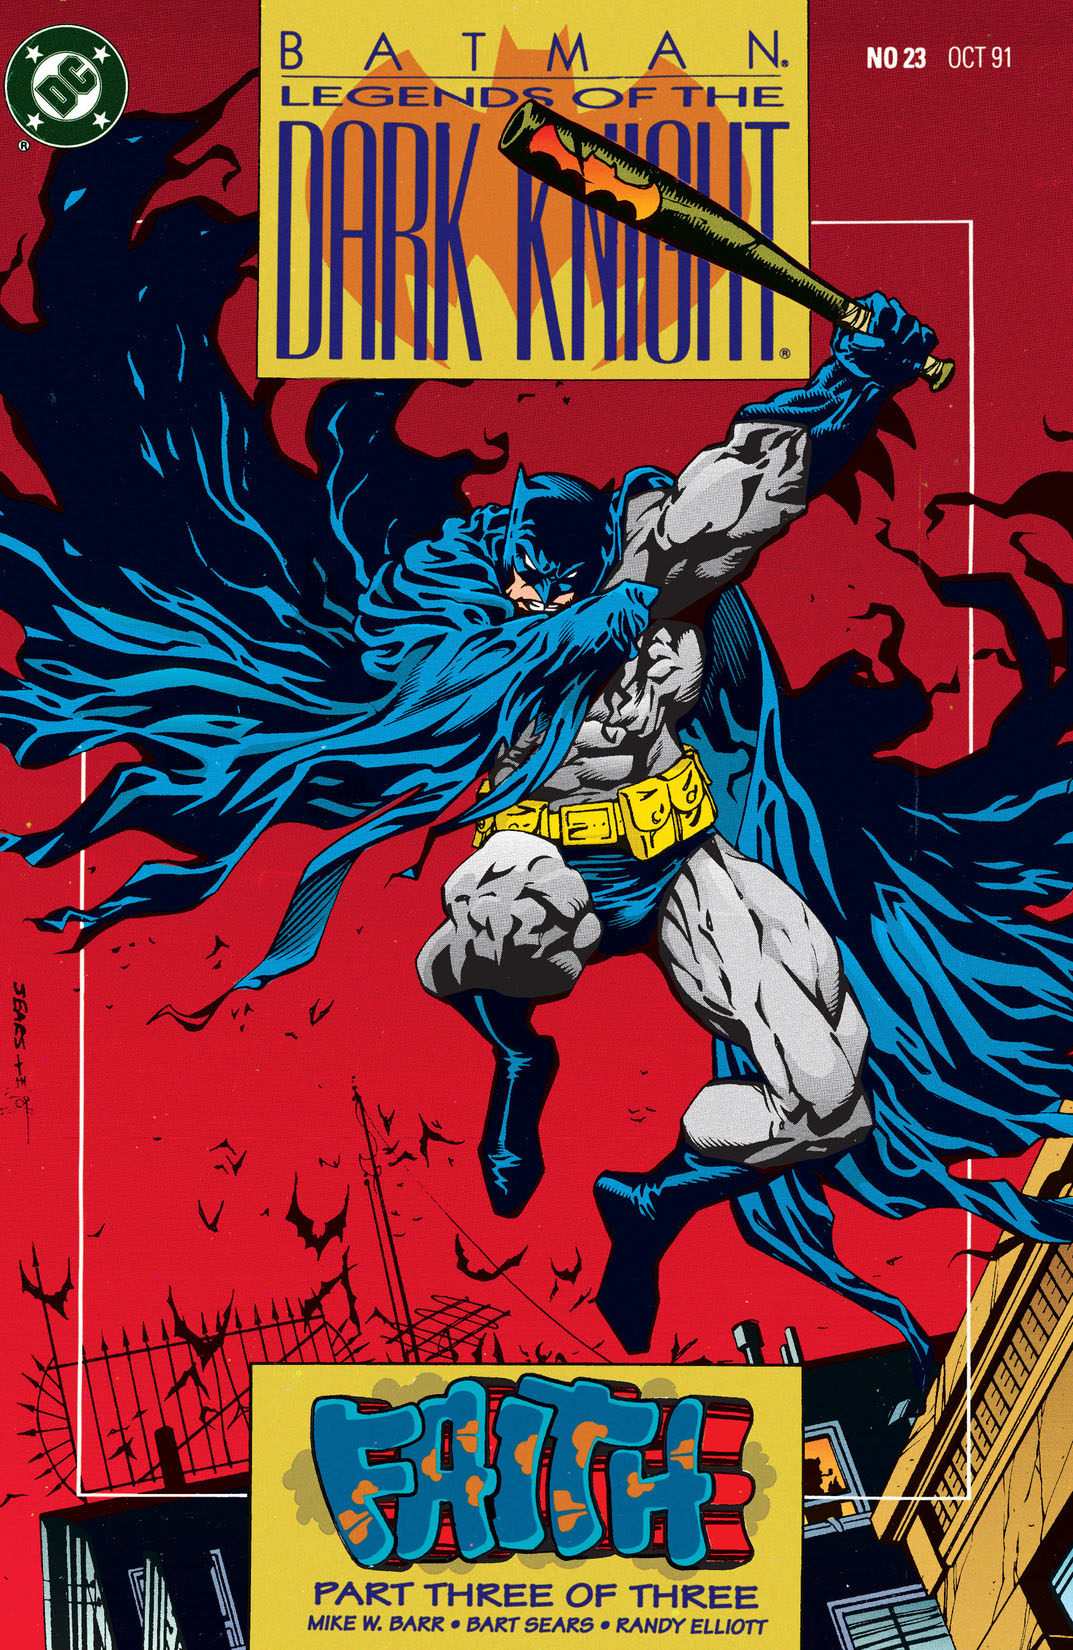 Batman: Legends of the Dark Knight #23 preview images